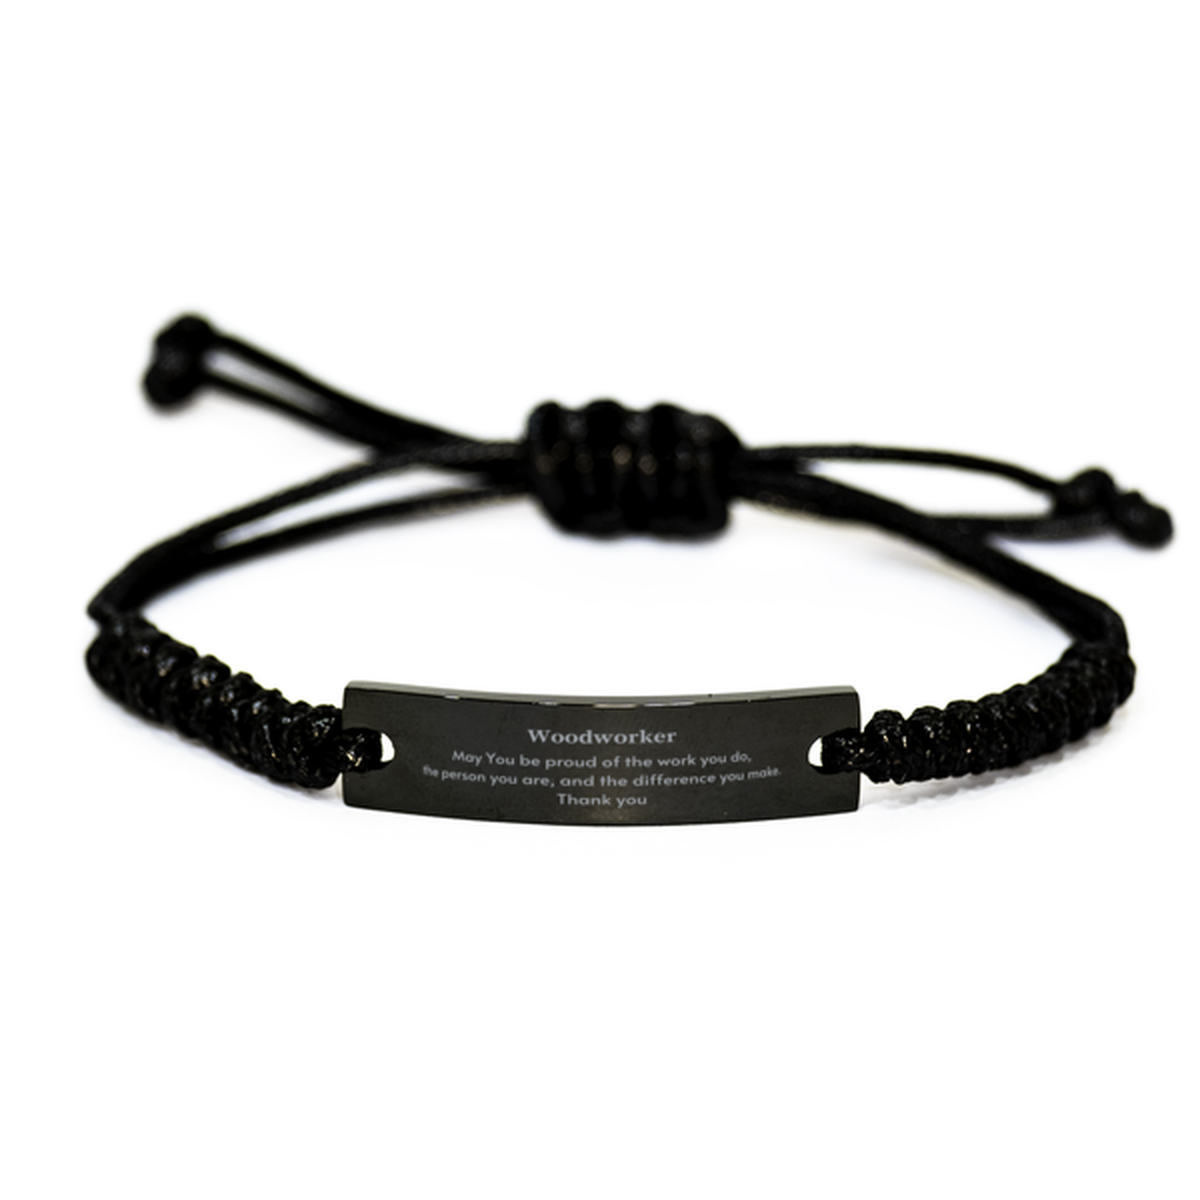 Heartwarming Black Rope Bracelet Retirement Coworkers Gifts for Woodworker, Woodworker May You be proud of the work you do, the person you are Gifts for Boss Men Women Friends